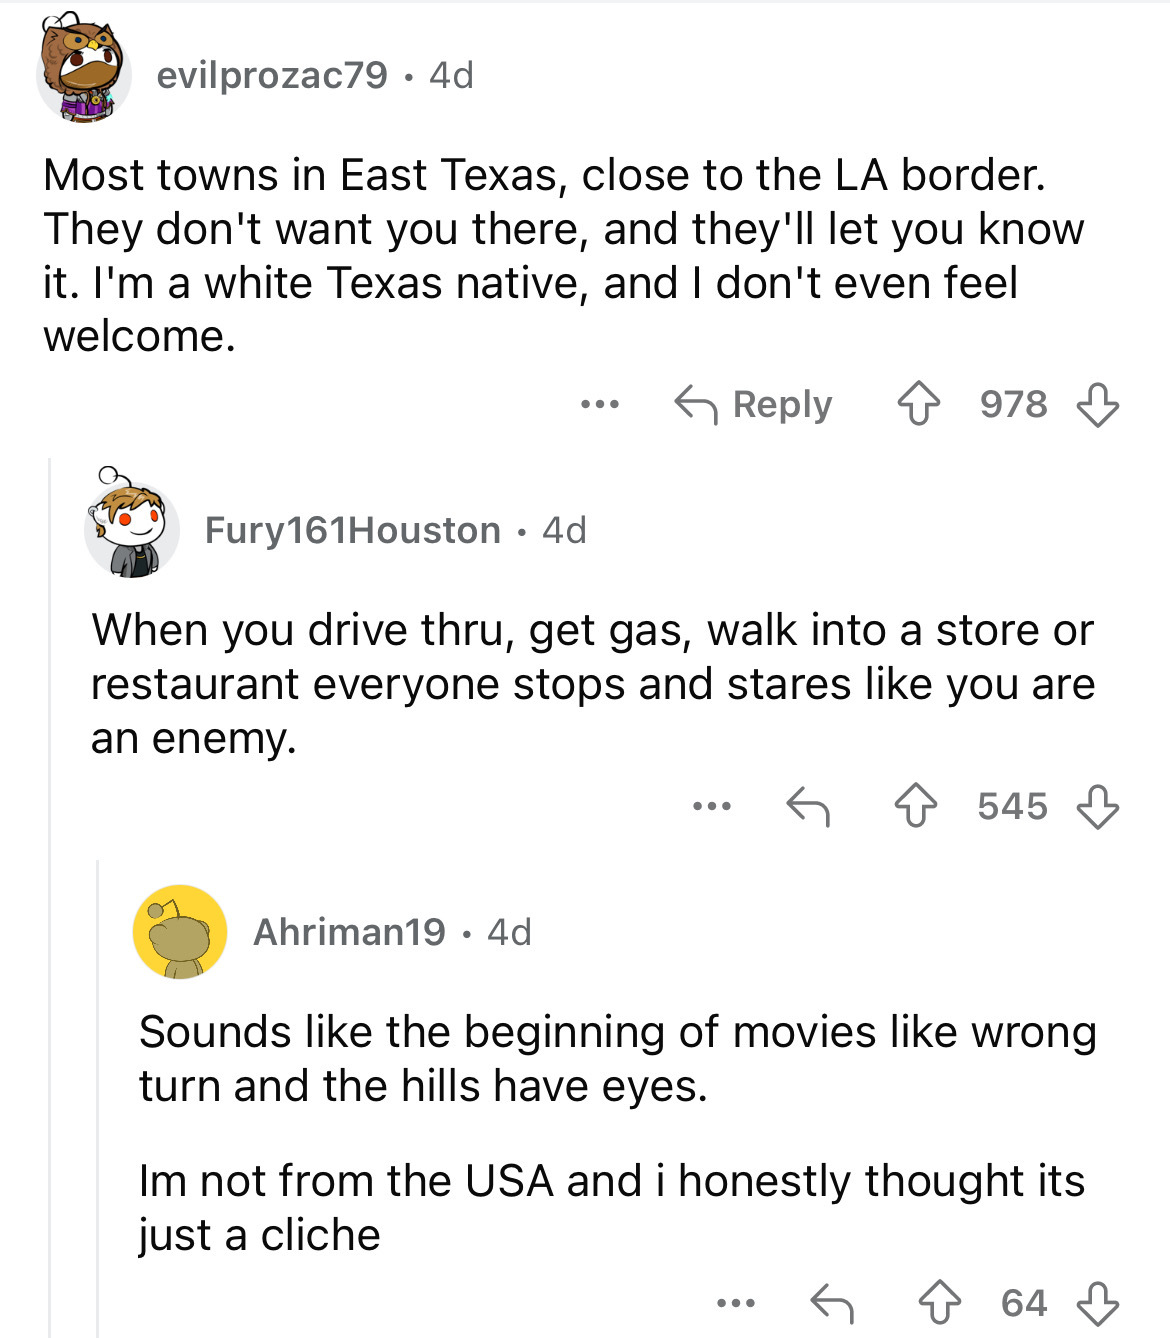 screenshot - evilprozac79. 4d Most towns in East Texas, close to the La border. They don't want you there, and they'll let you know it. I'm a white Texas native, and I don't even feel welcome. 978 Fury161Houston 4d When you drive thru, get gas, walk into 